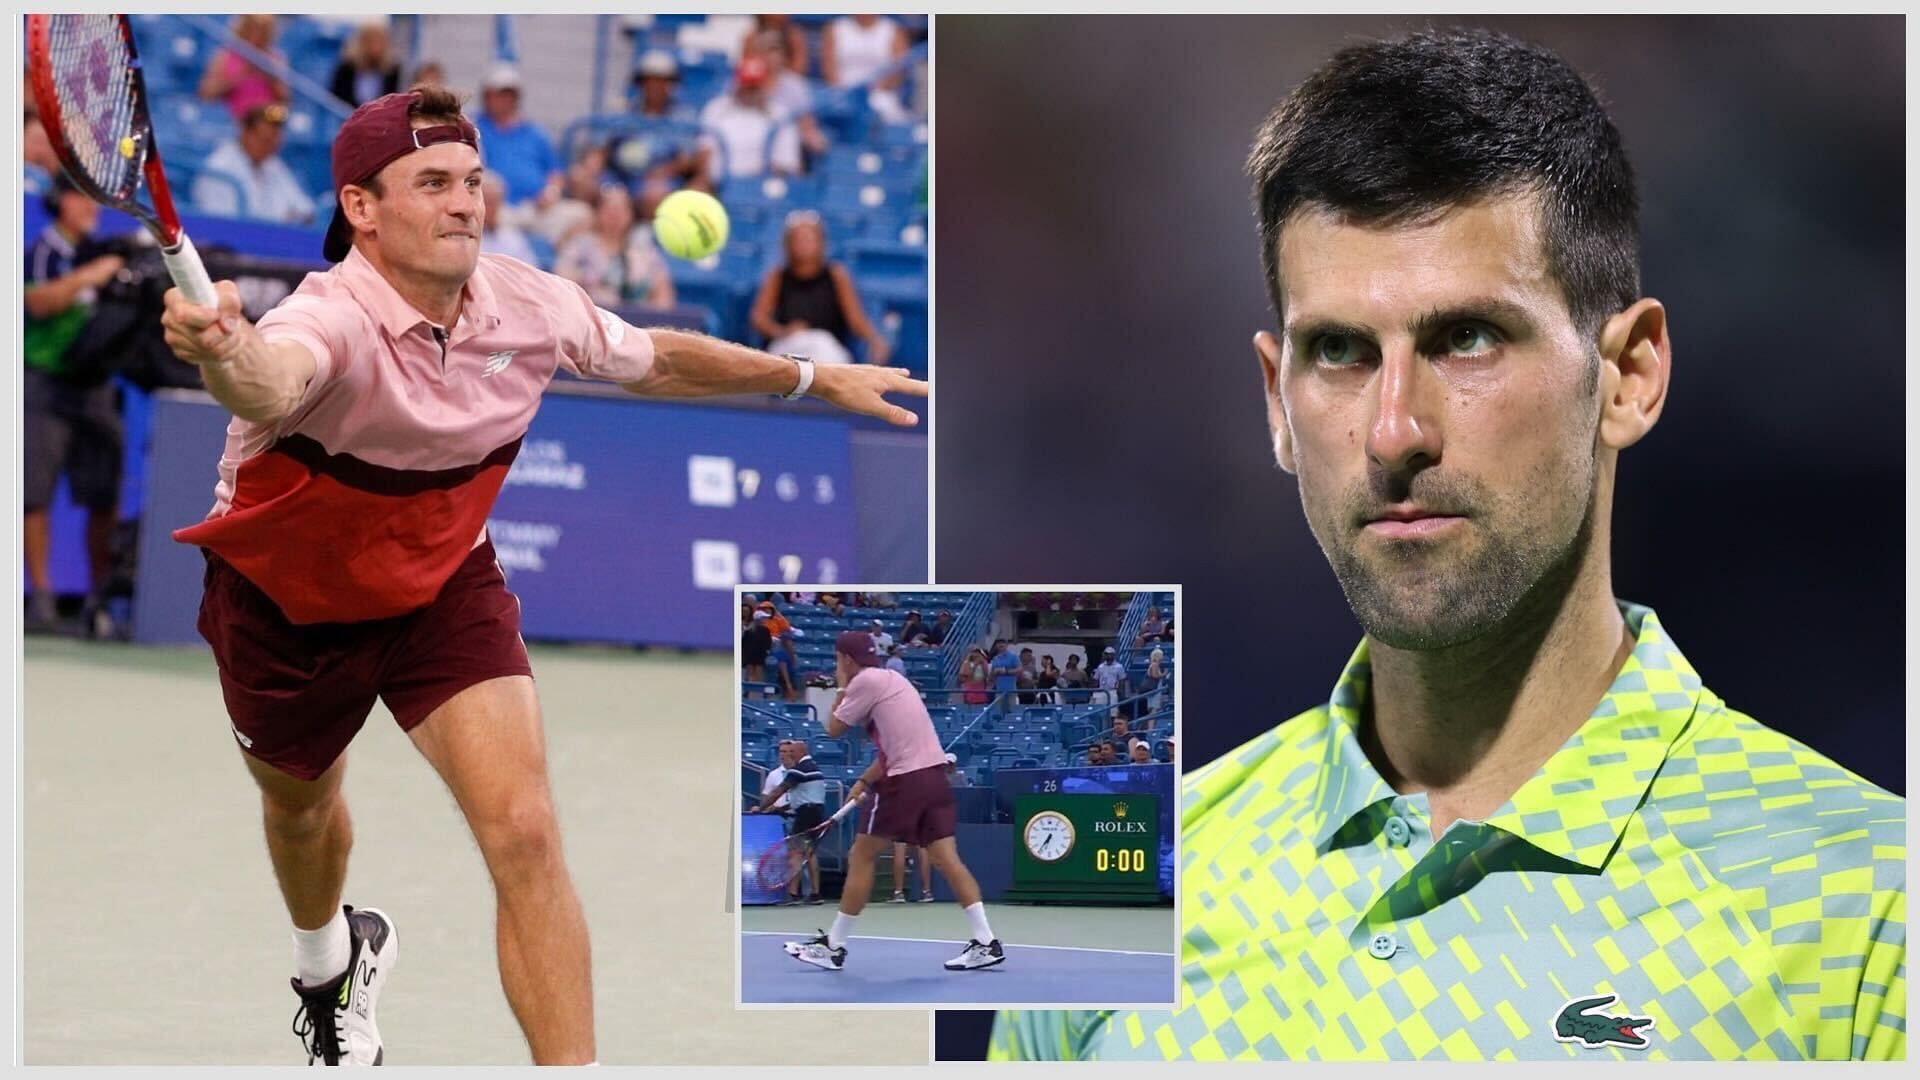 Novak Djokovic was infamously disqualified from the 2020 US Open